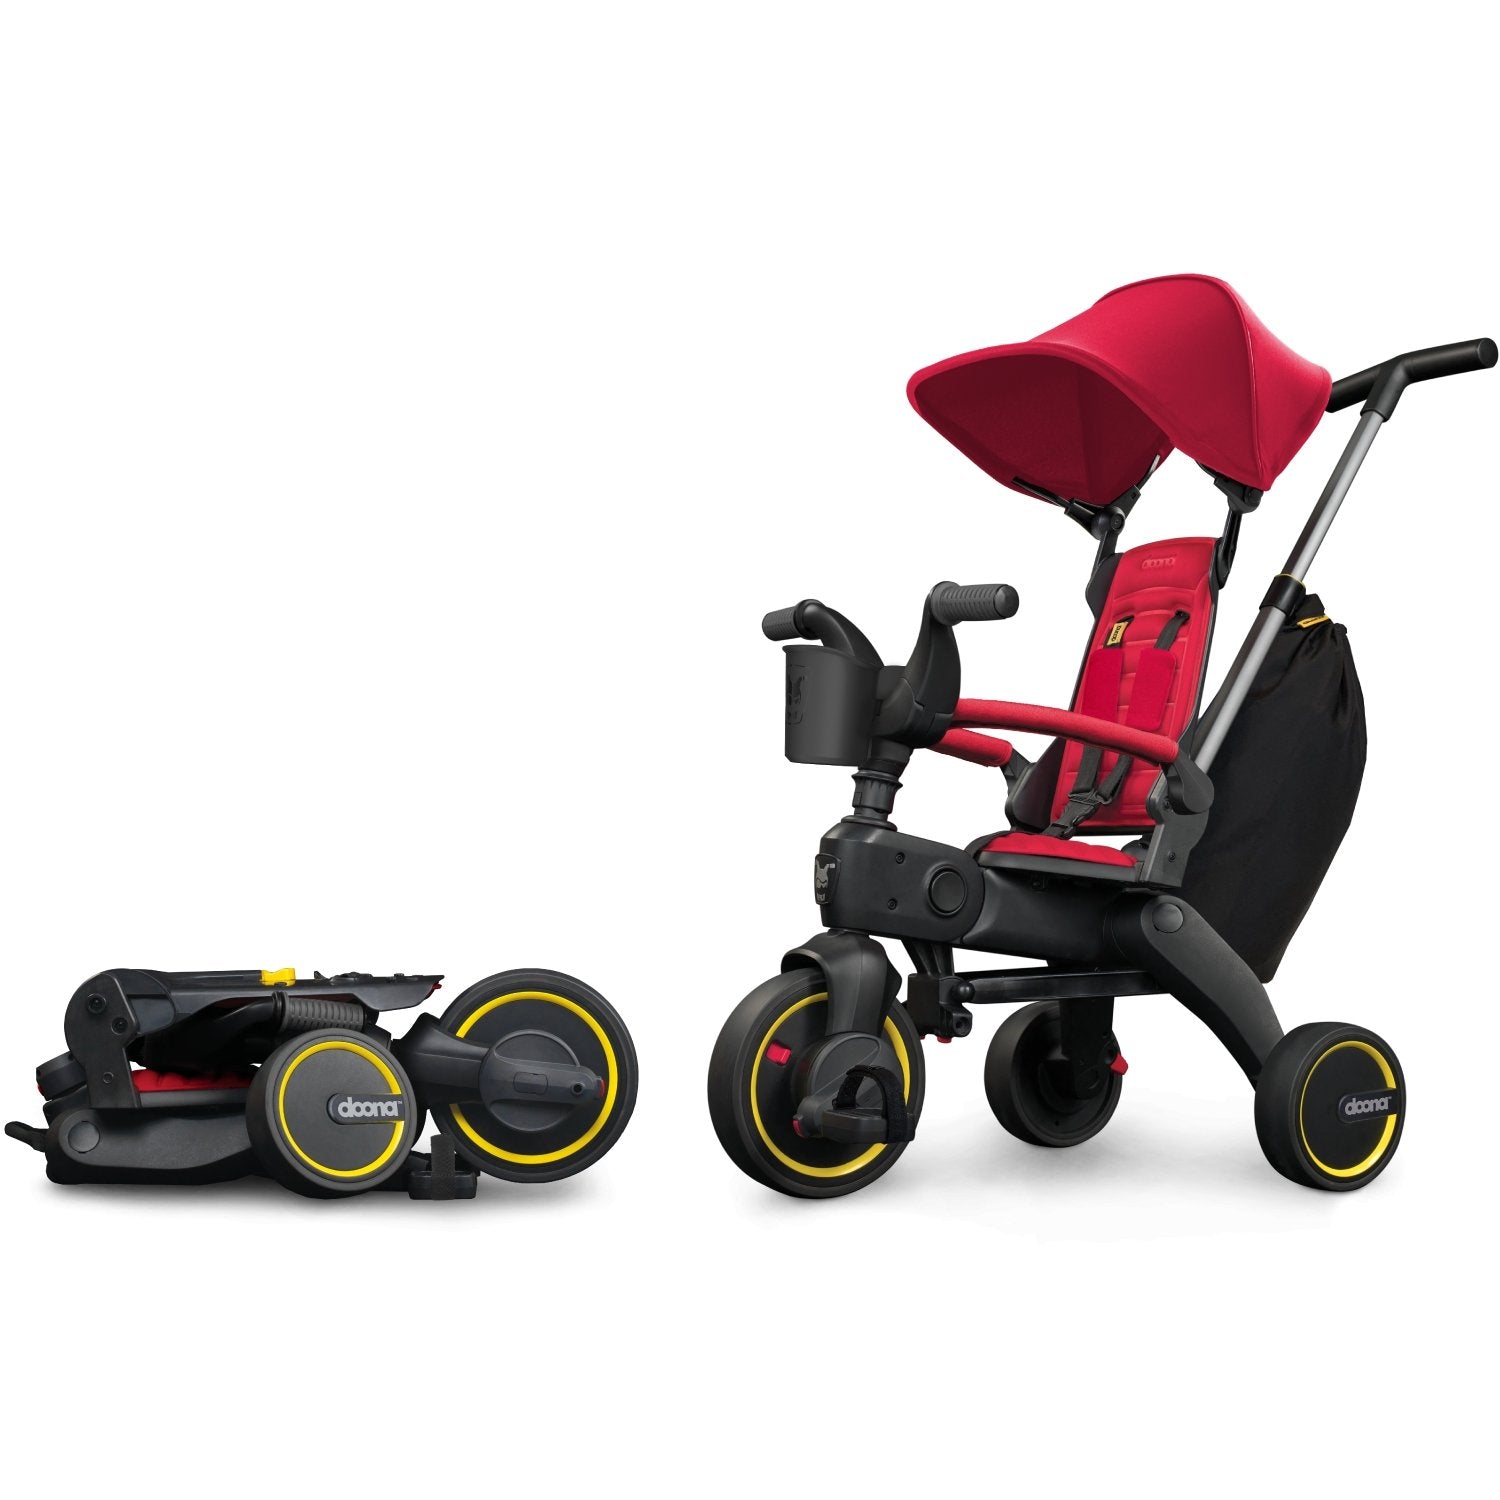 DOONA Liki Trike S3 Compact Foldable Tricycle - ANB Baby -$100 - $300